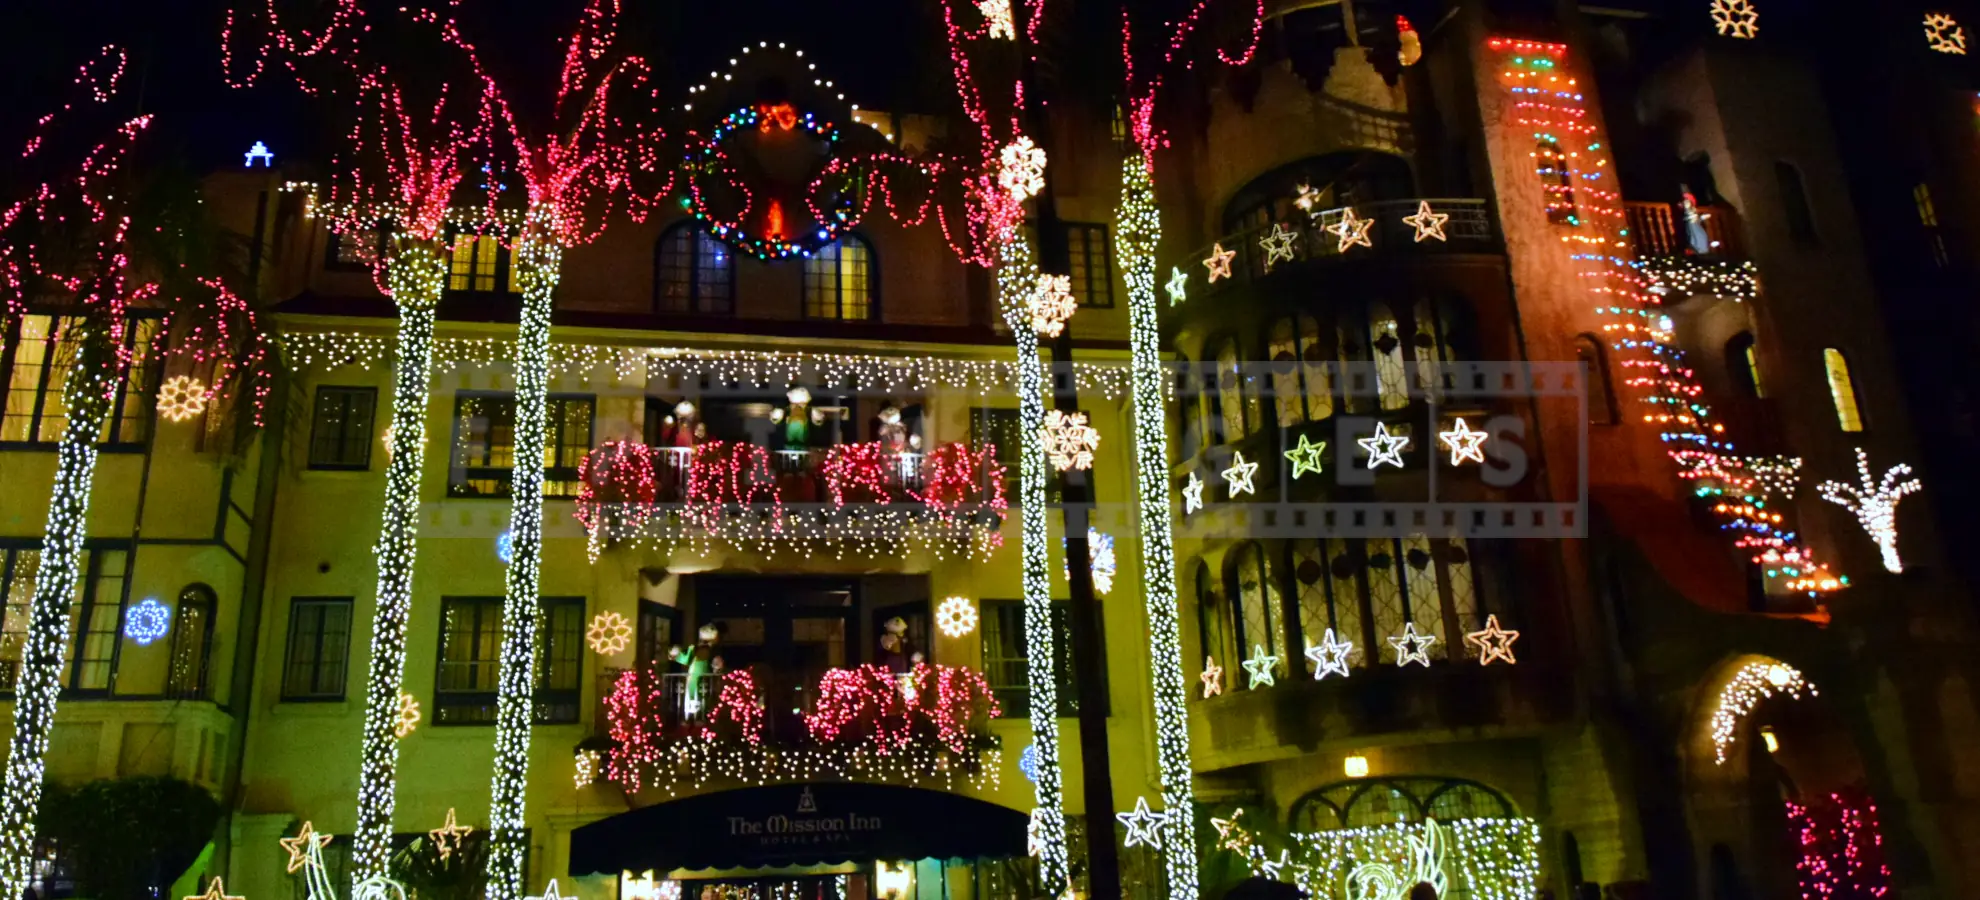 Don’t Miss Festival of Lights at the Mission Inn during Christmas season